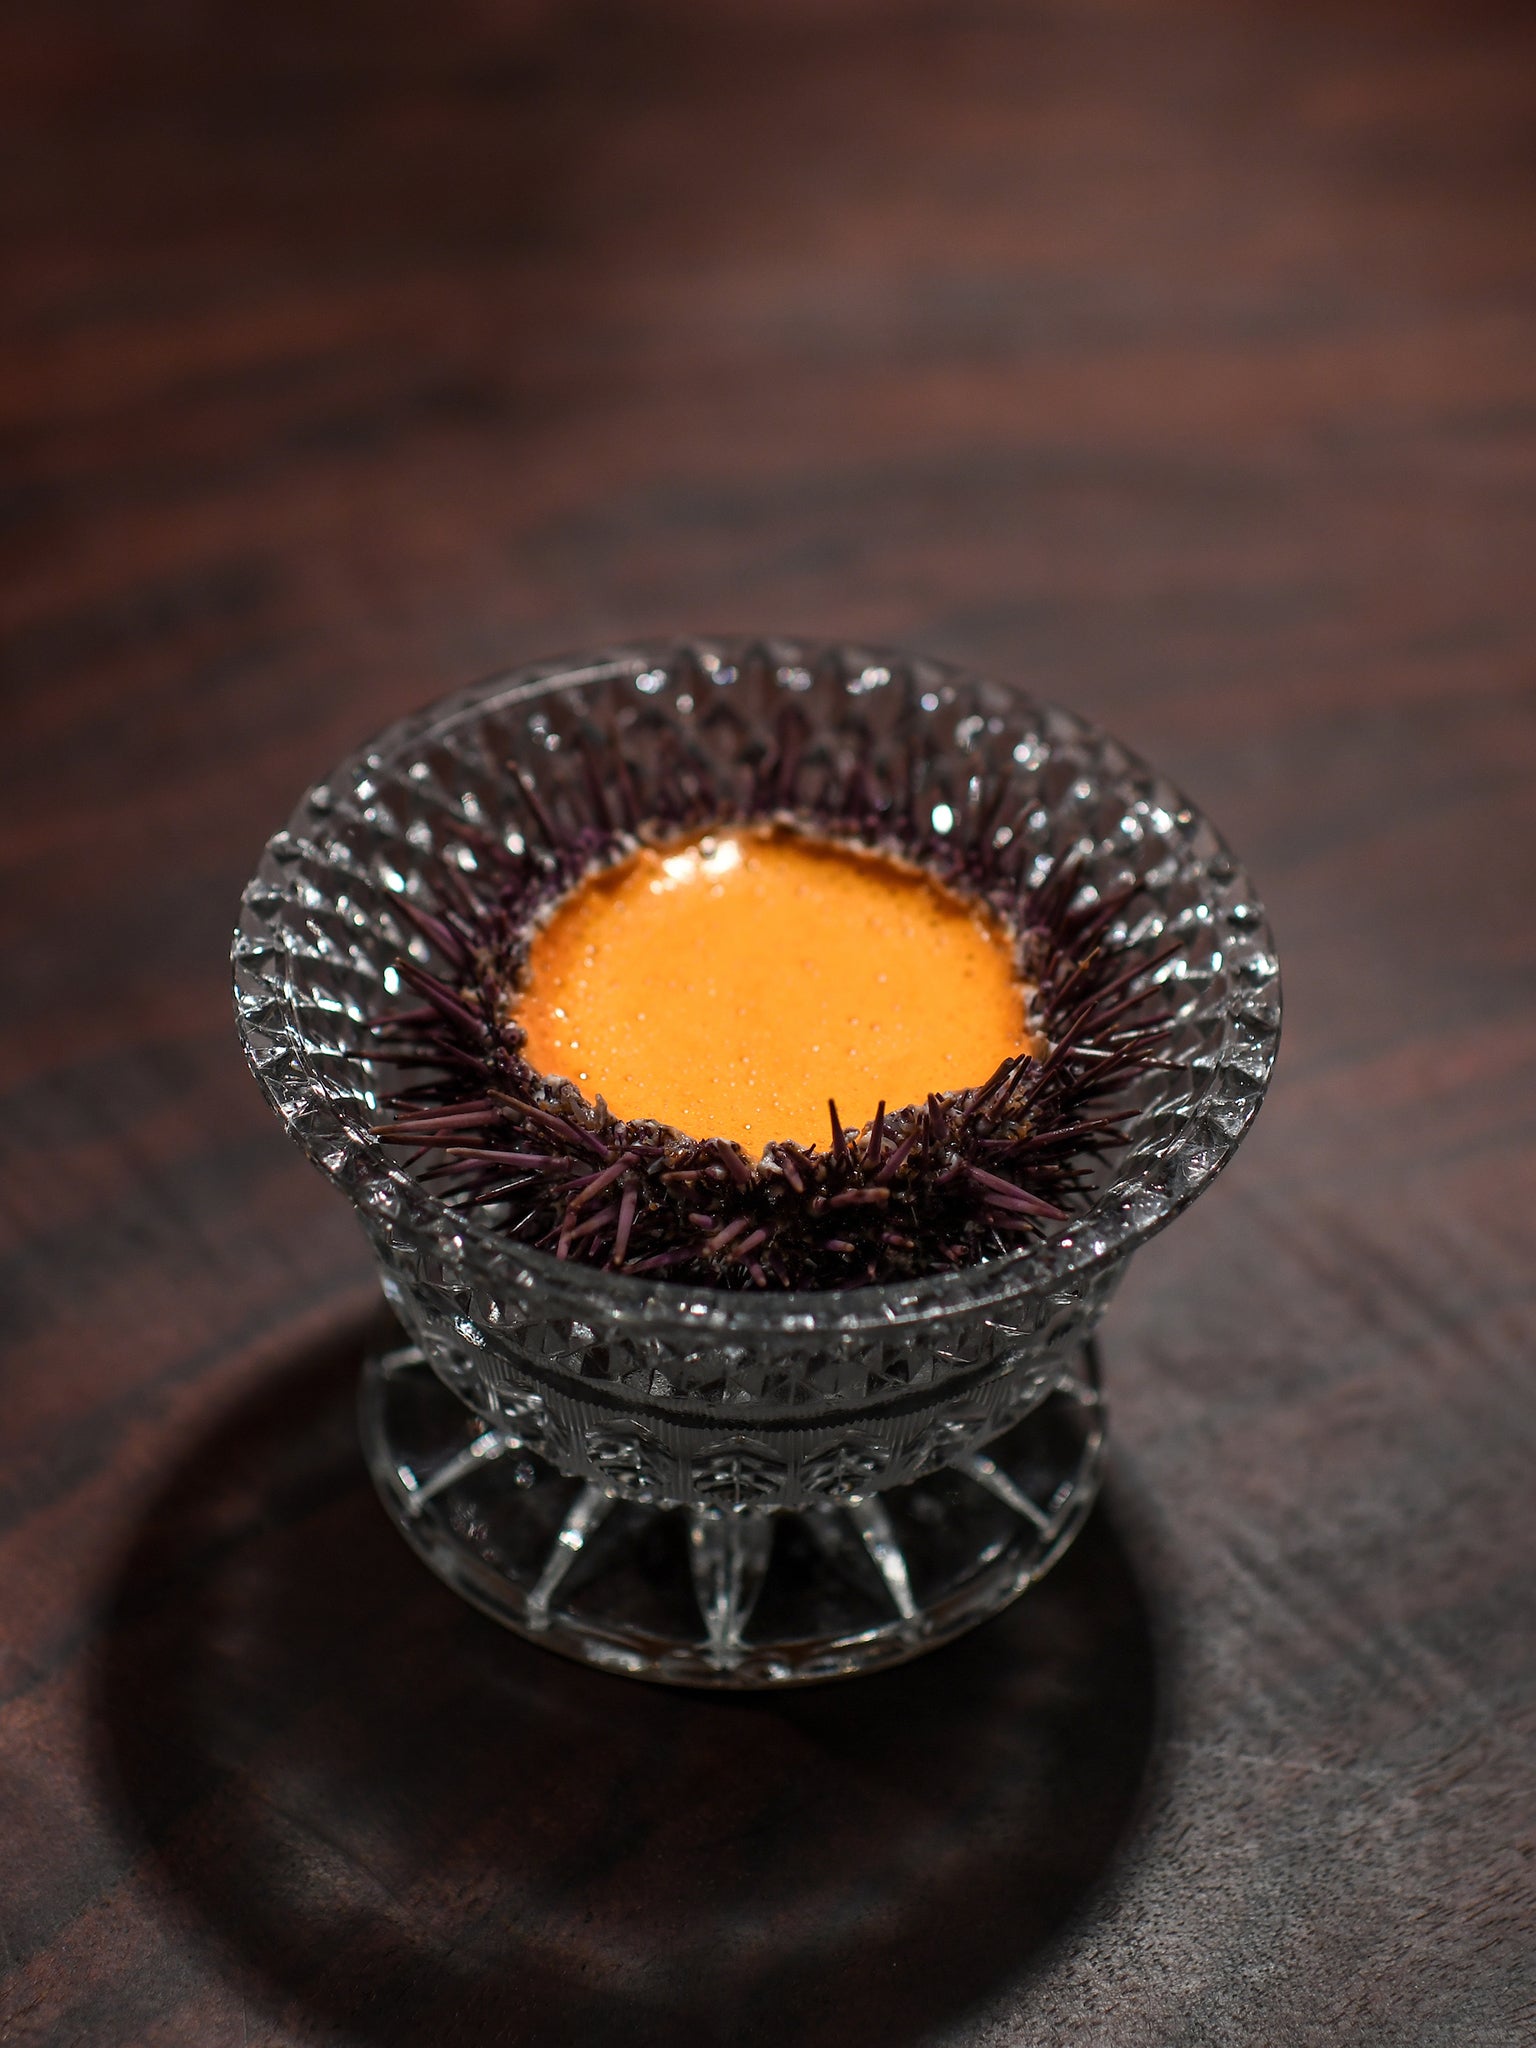 The abundant purple sea urchin, pureed and served in its shell